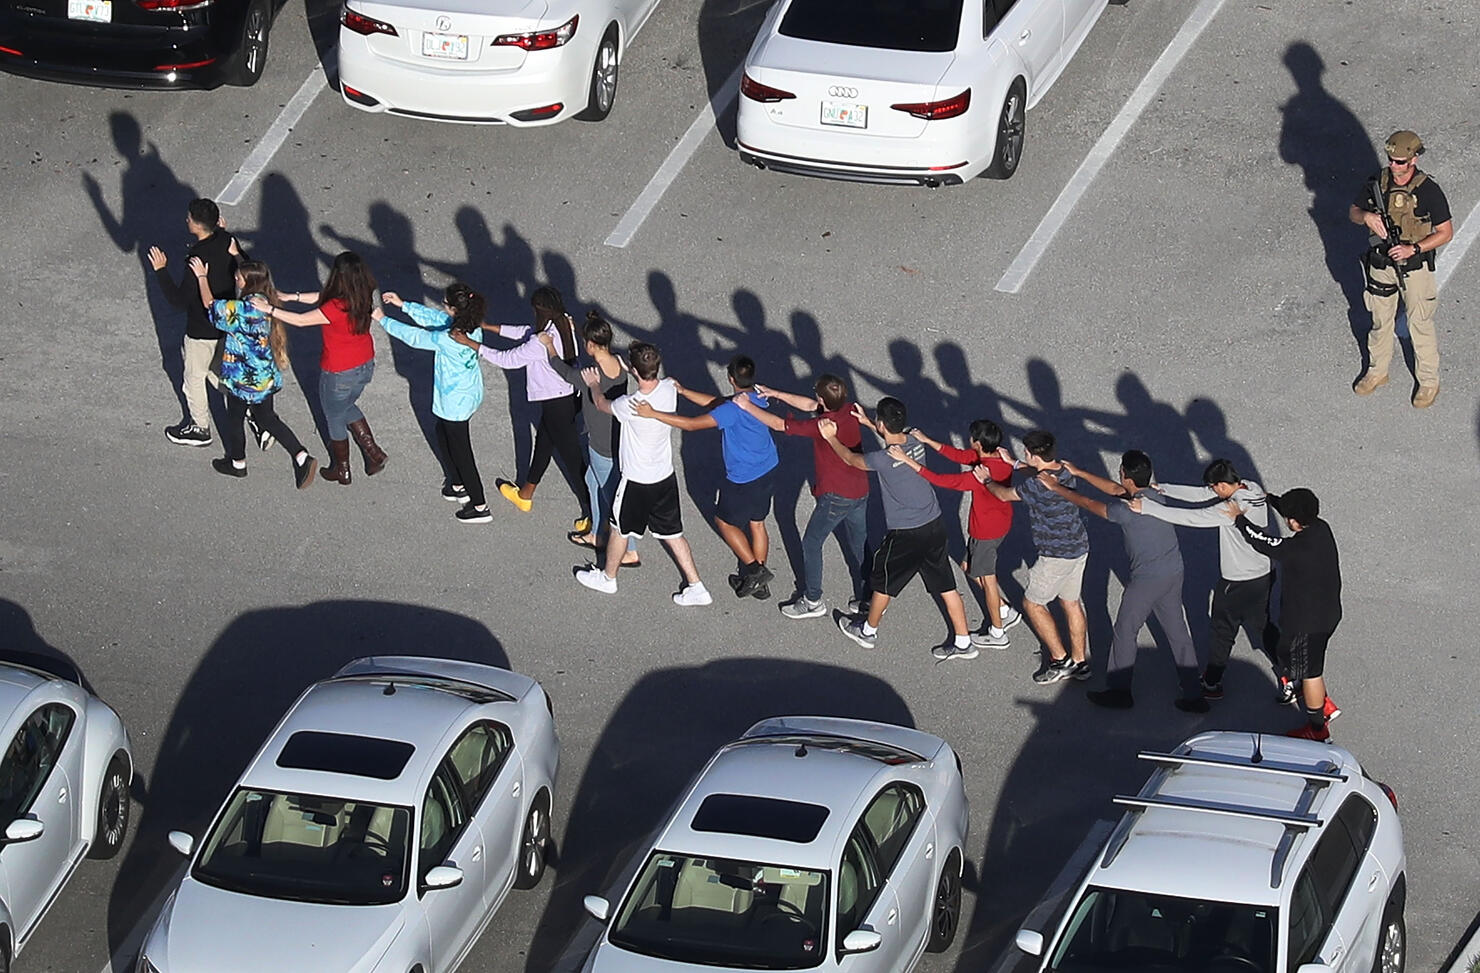 Shooting at Marjory Stoneman Douglas one of the biggest news stories of 2018